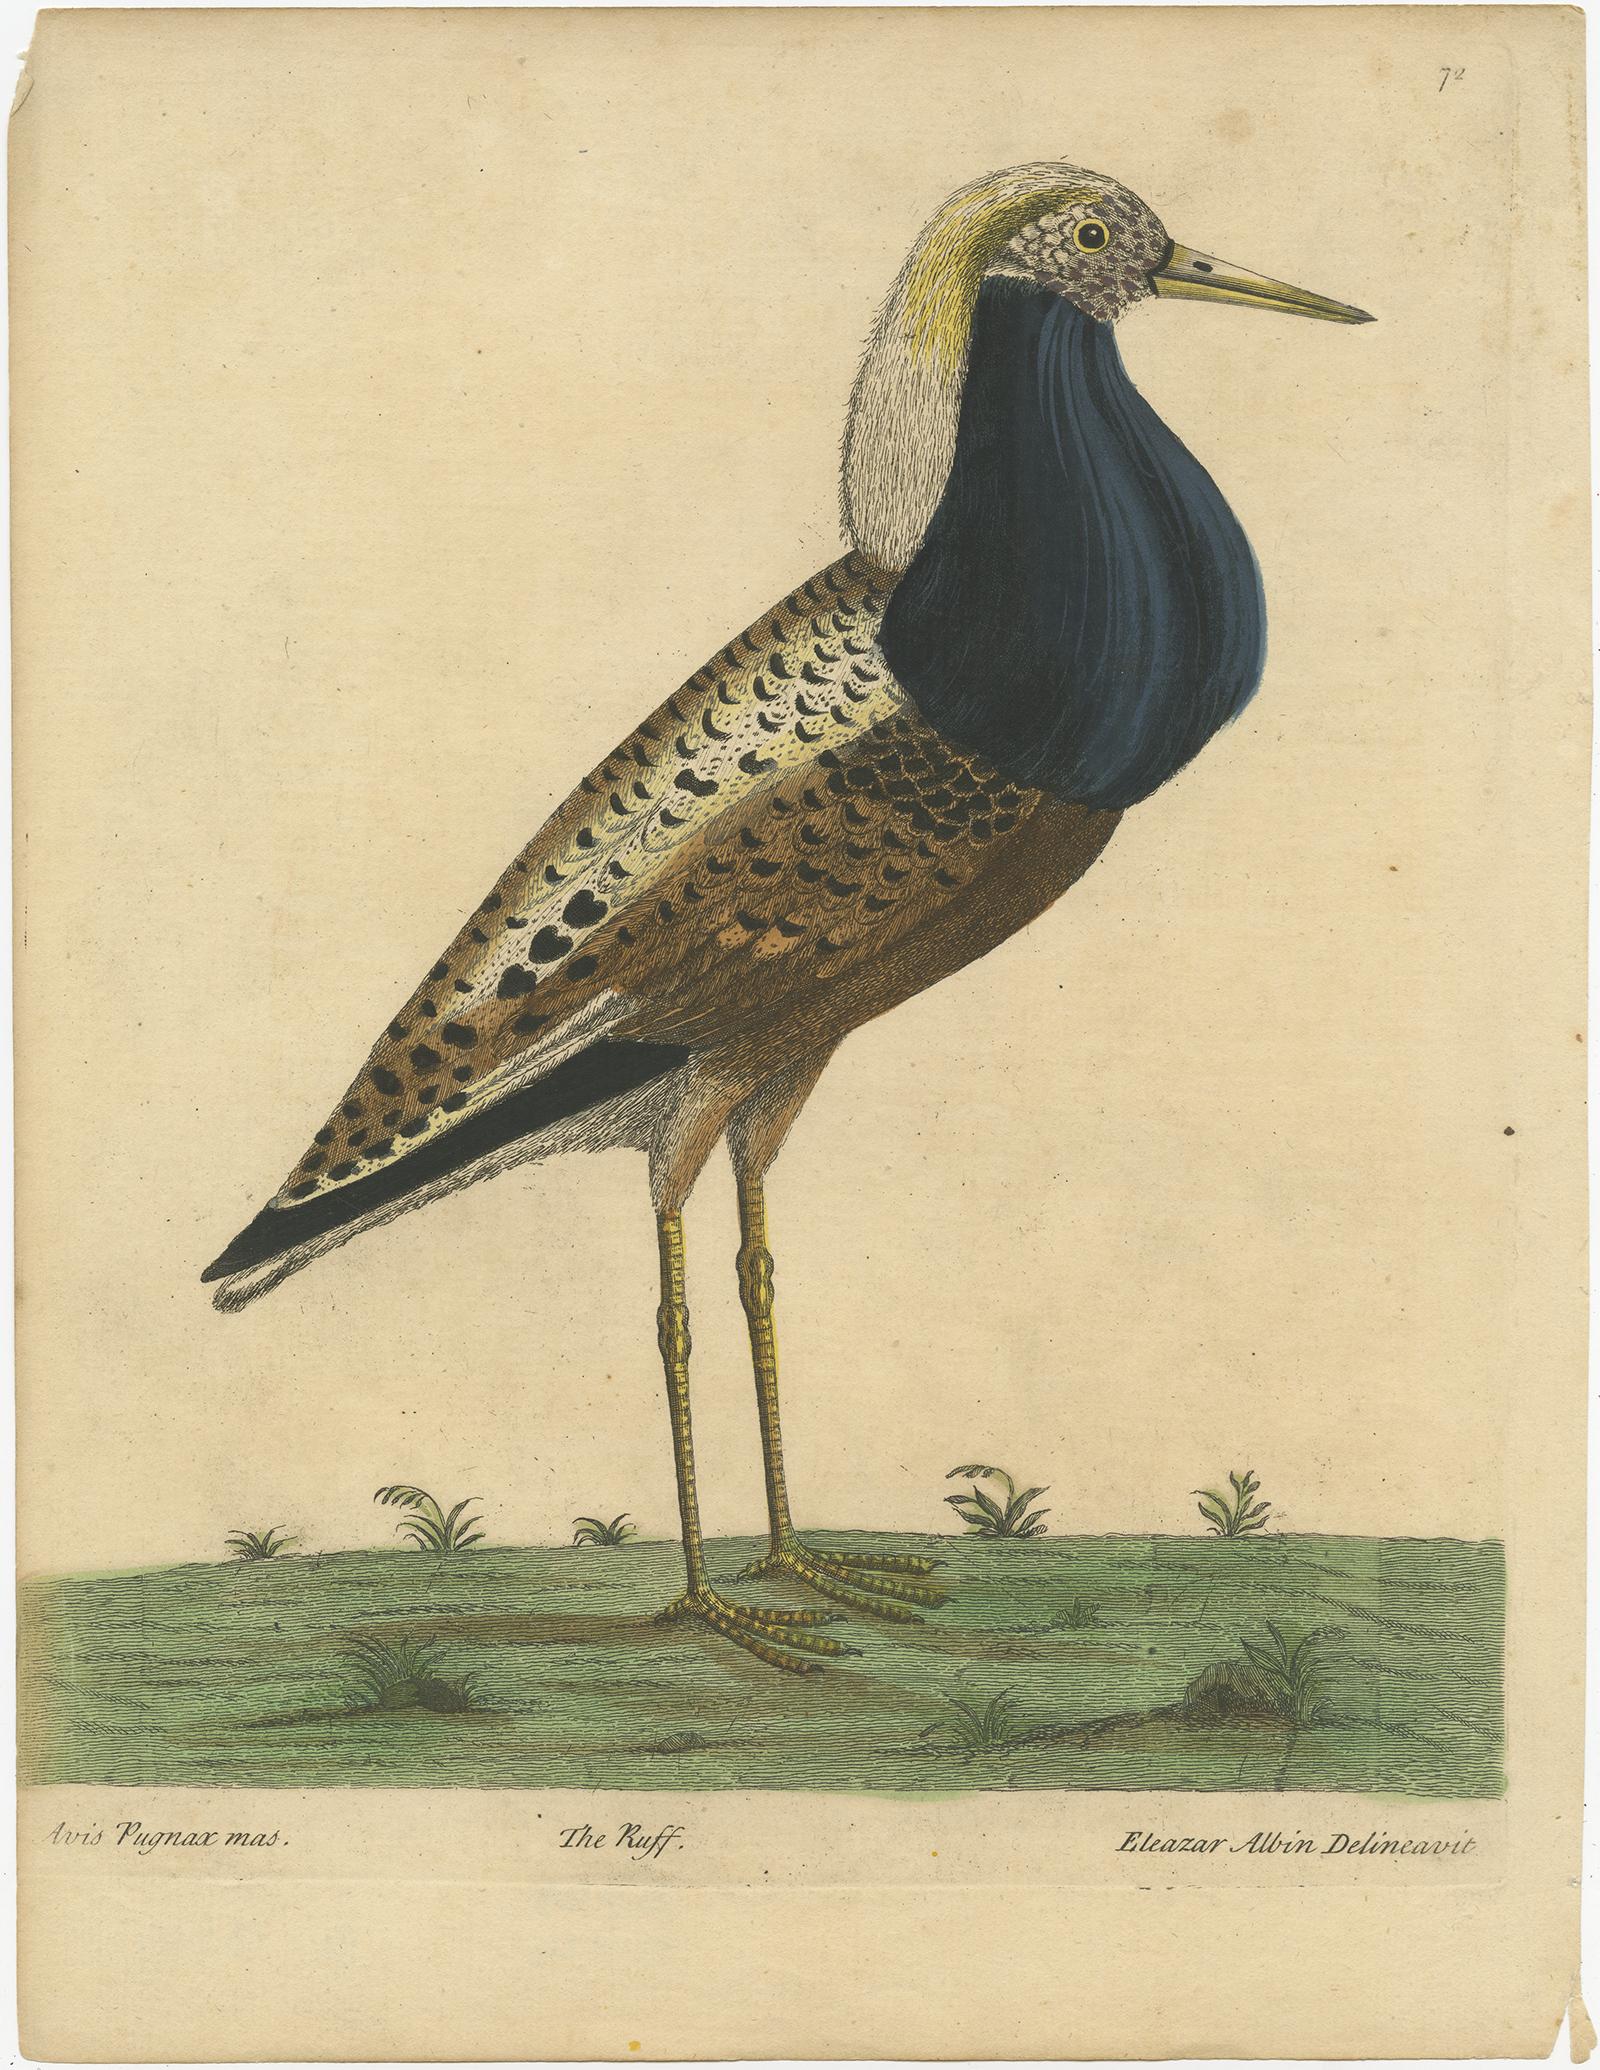 Description: Antique print titled 'Avis pugnax mas'. Old bird print of the male ruff bird (Calidris pugnax), amedium-sized wading bird that breeds in marshes and wet meadows across northern Eurasia . This highly gregarious sandpiper is migratory and